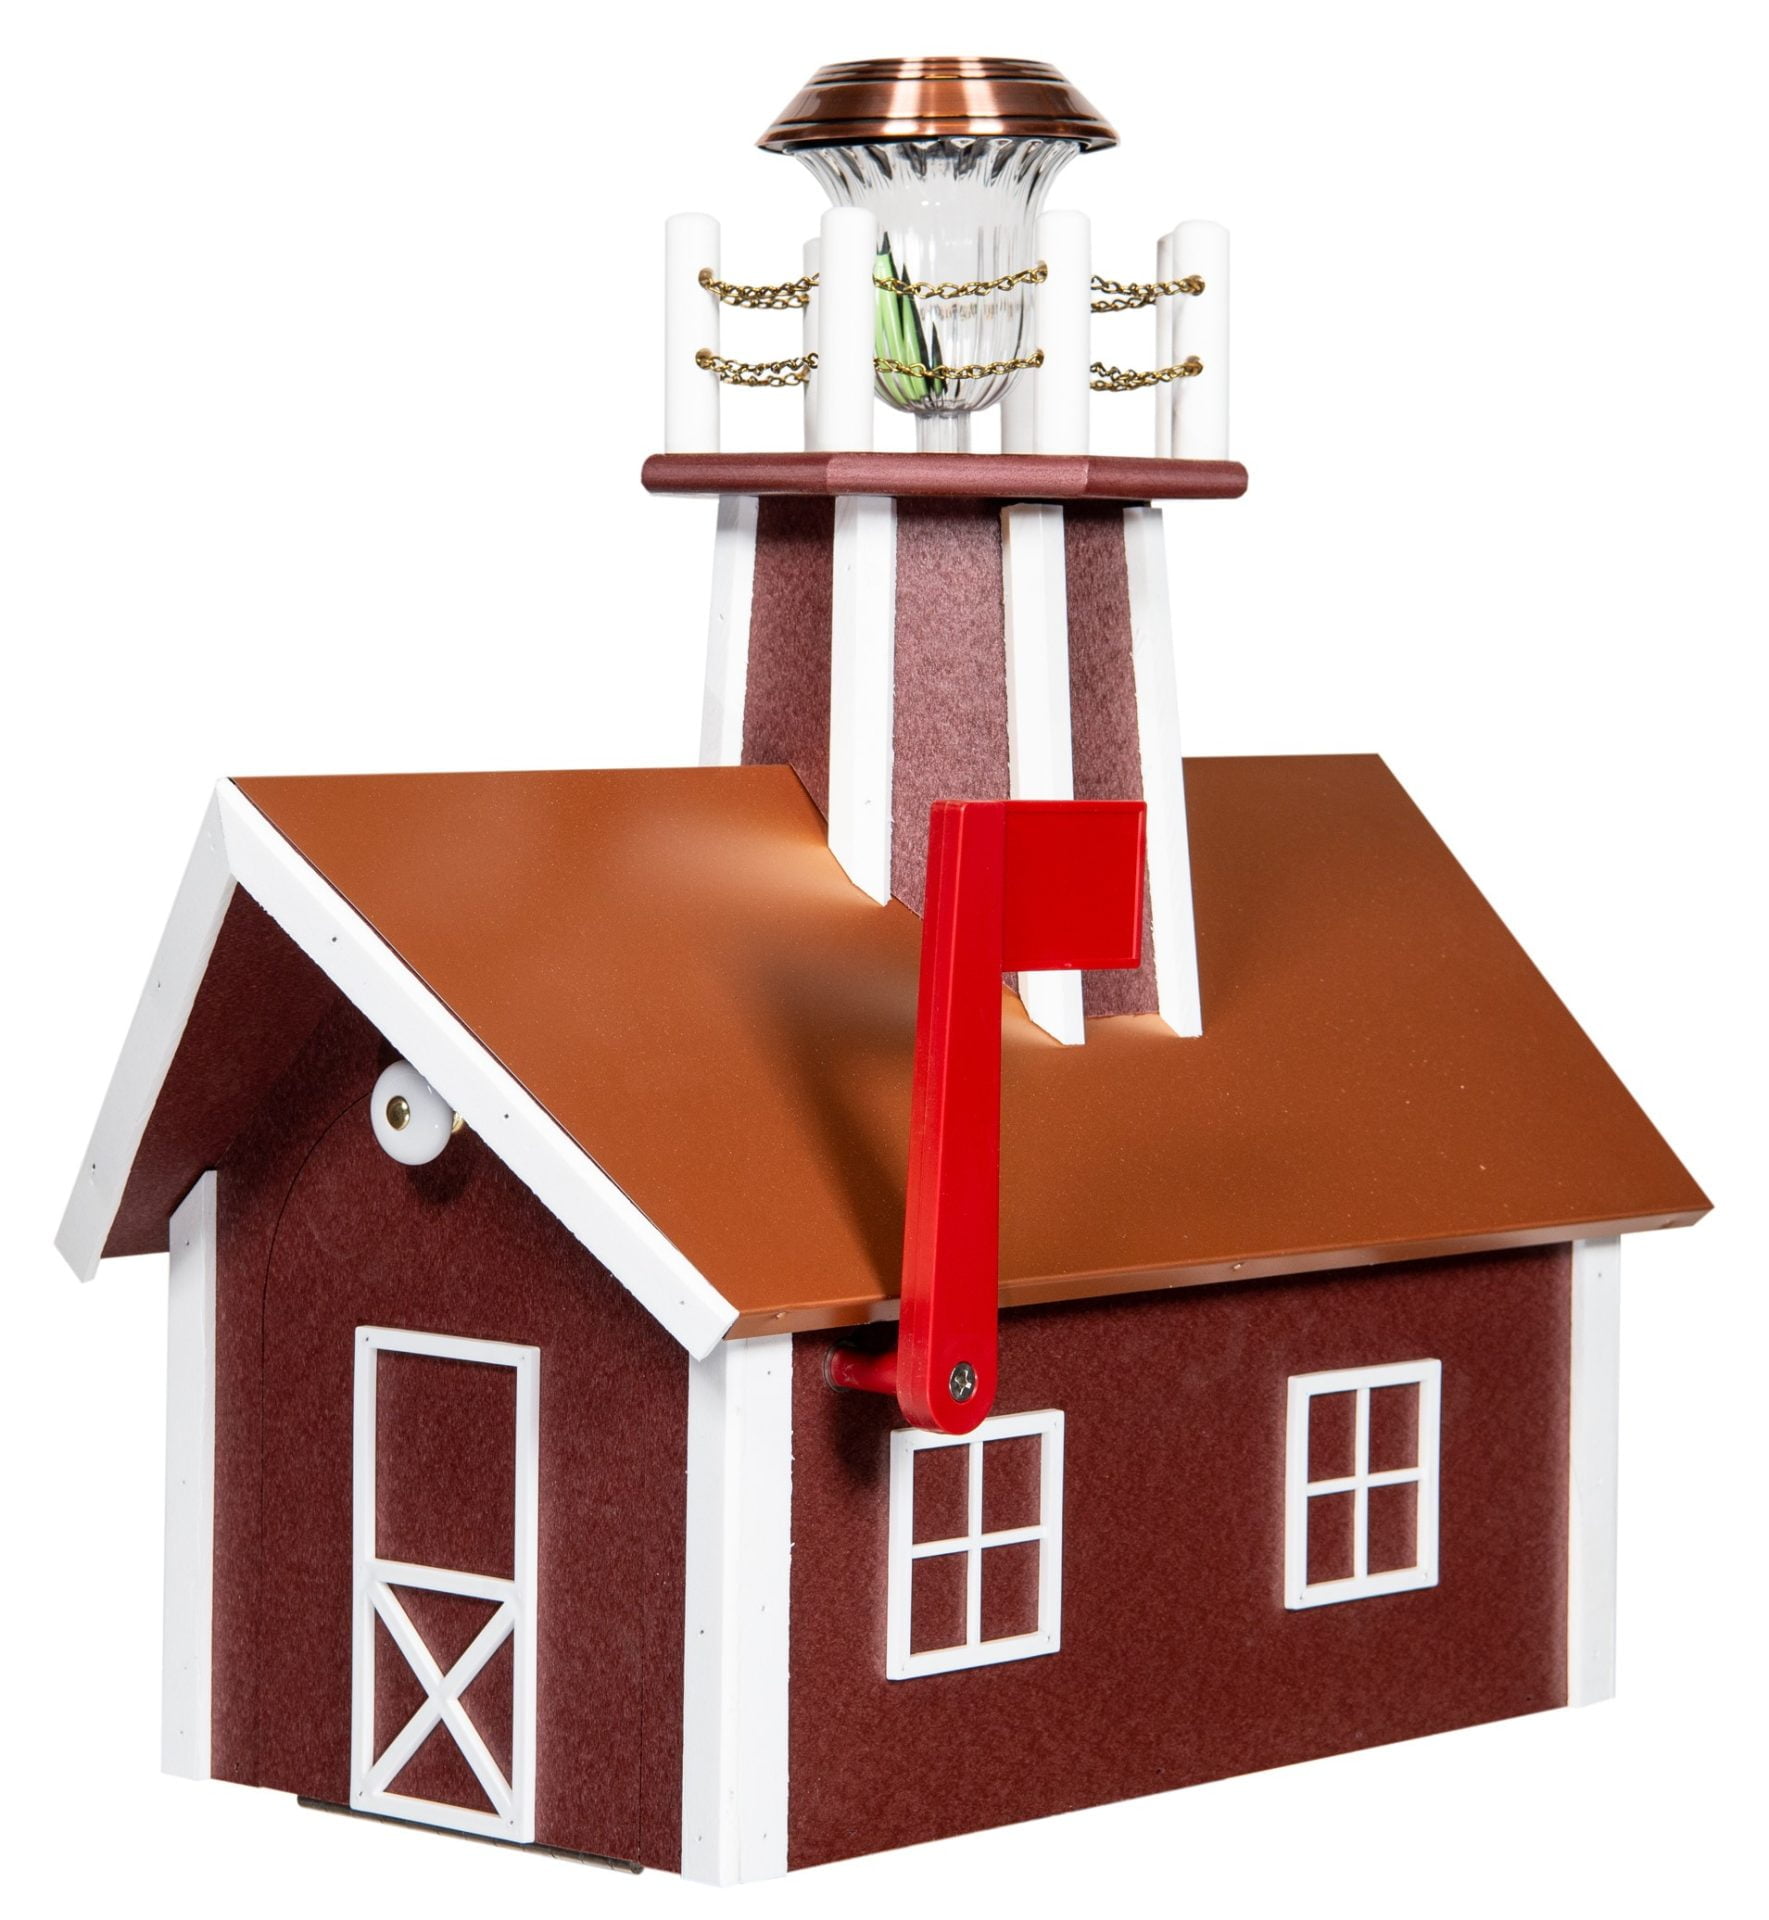 Penny Copper Roof Deluxe Mailbox with Lighthouse